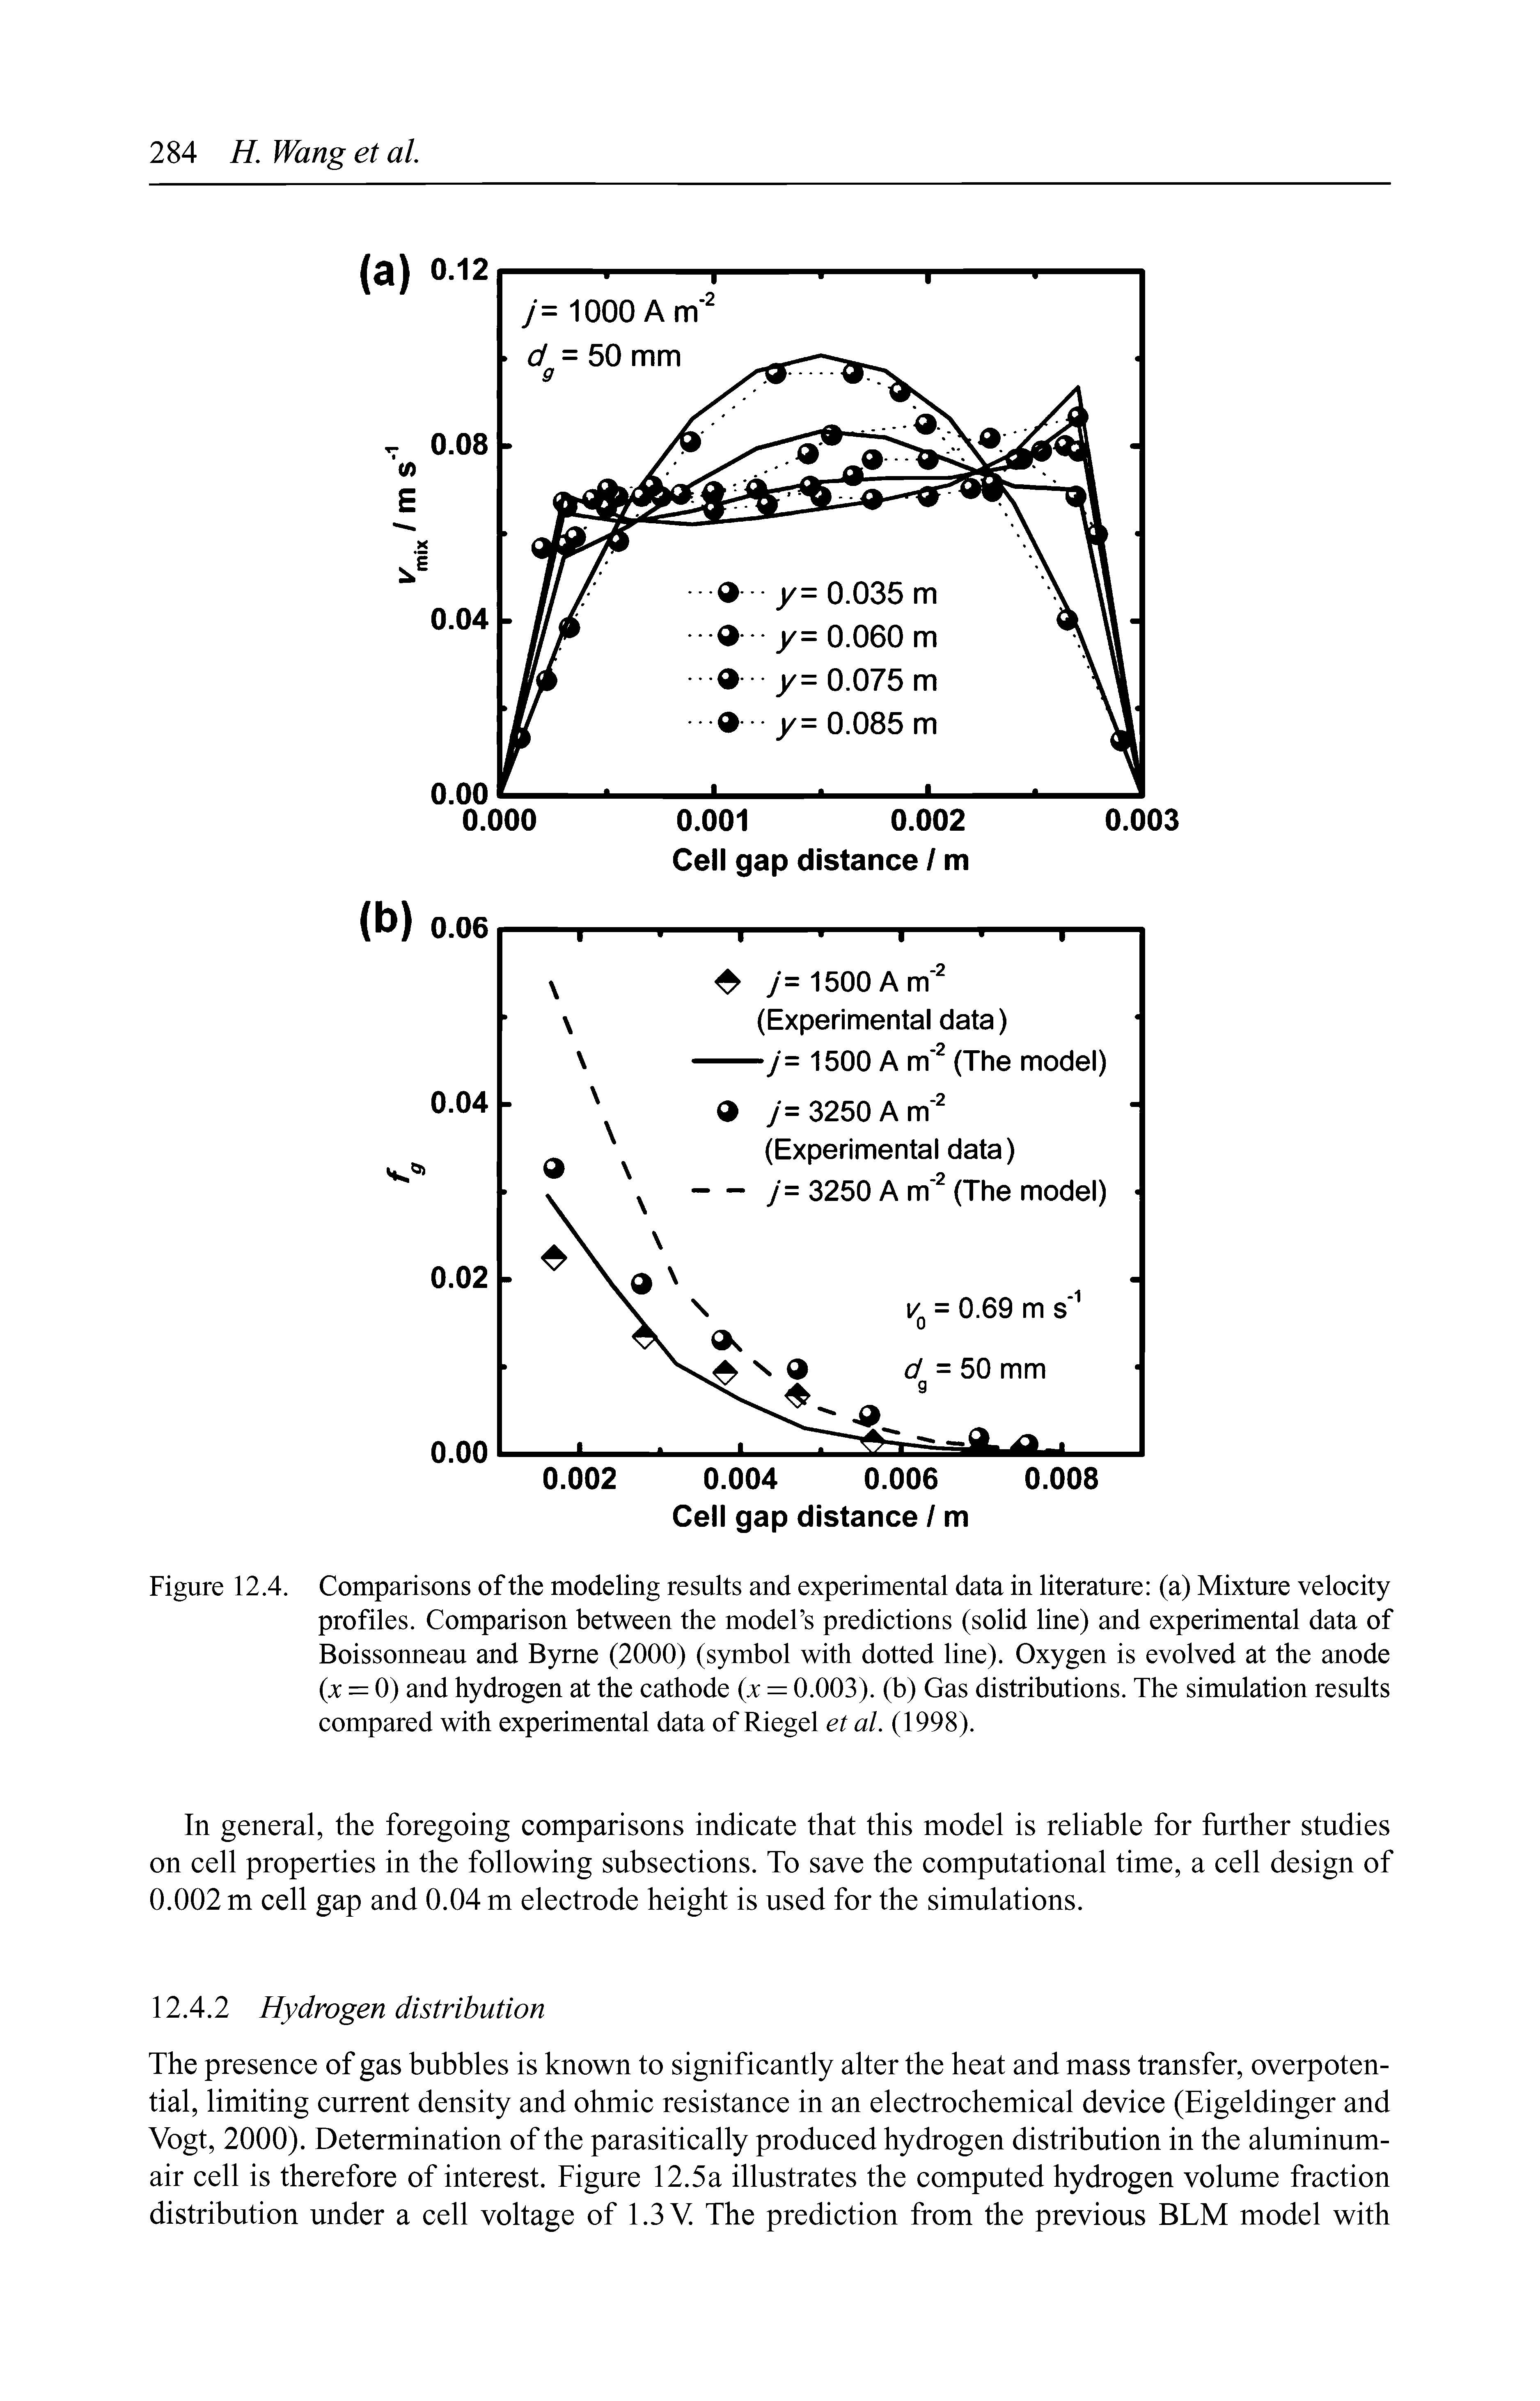 Figure 12.4. Comparisons of the modeling results and experimental data in literature (a) Mixture velocity profiles. Comparison between the model s predictions (solid line) and experimental data of Boissonneau and Byrne (2000) (symbol with dotted line). Oxygen is evolved at the anode (jc = 0) and hydrogen at the cathode (x = 0.003). (b) Gas distributions. The simulation results compared with experimental data of Riegel et al. (1998).